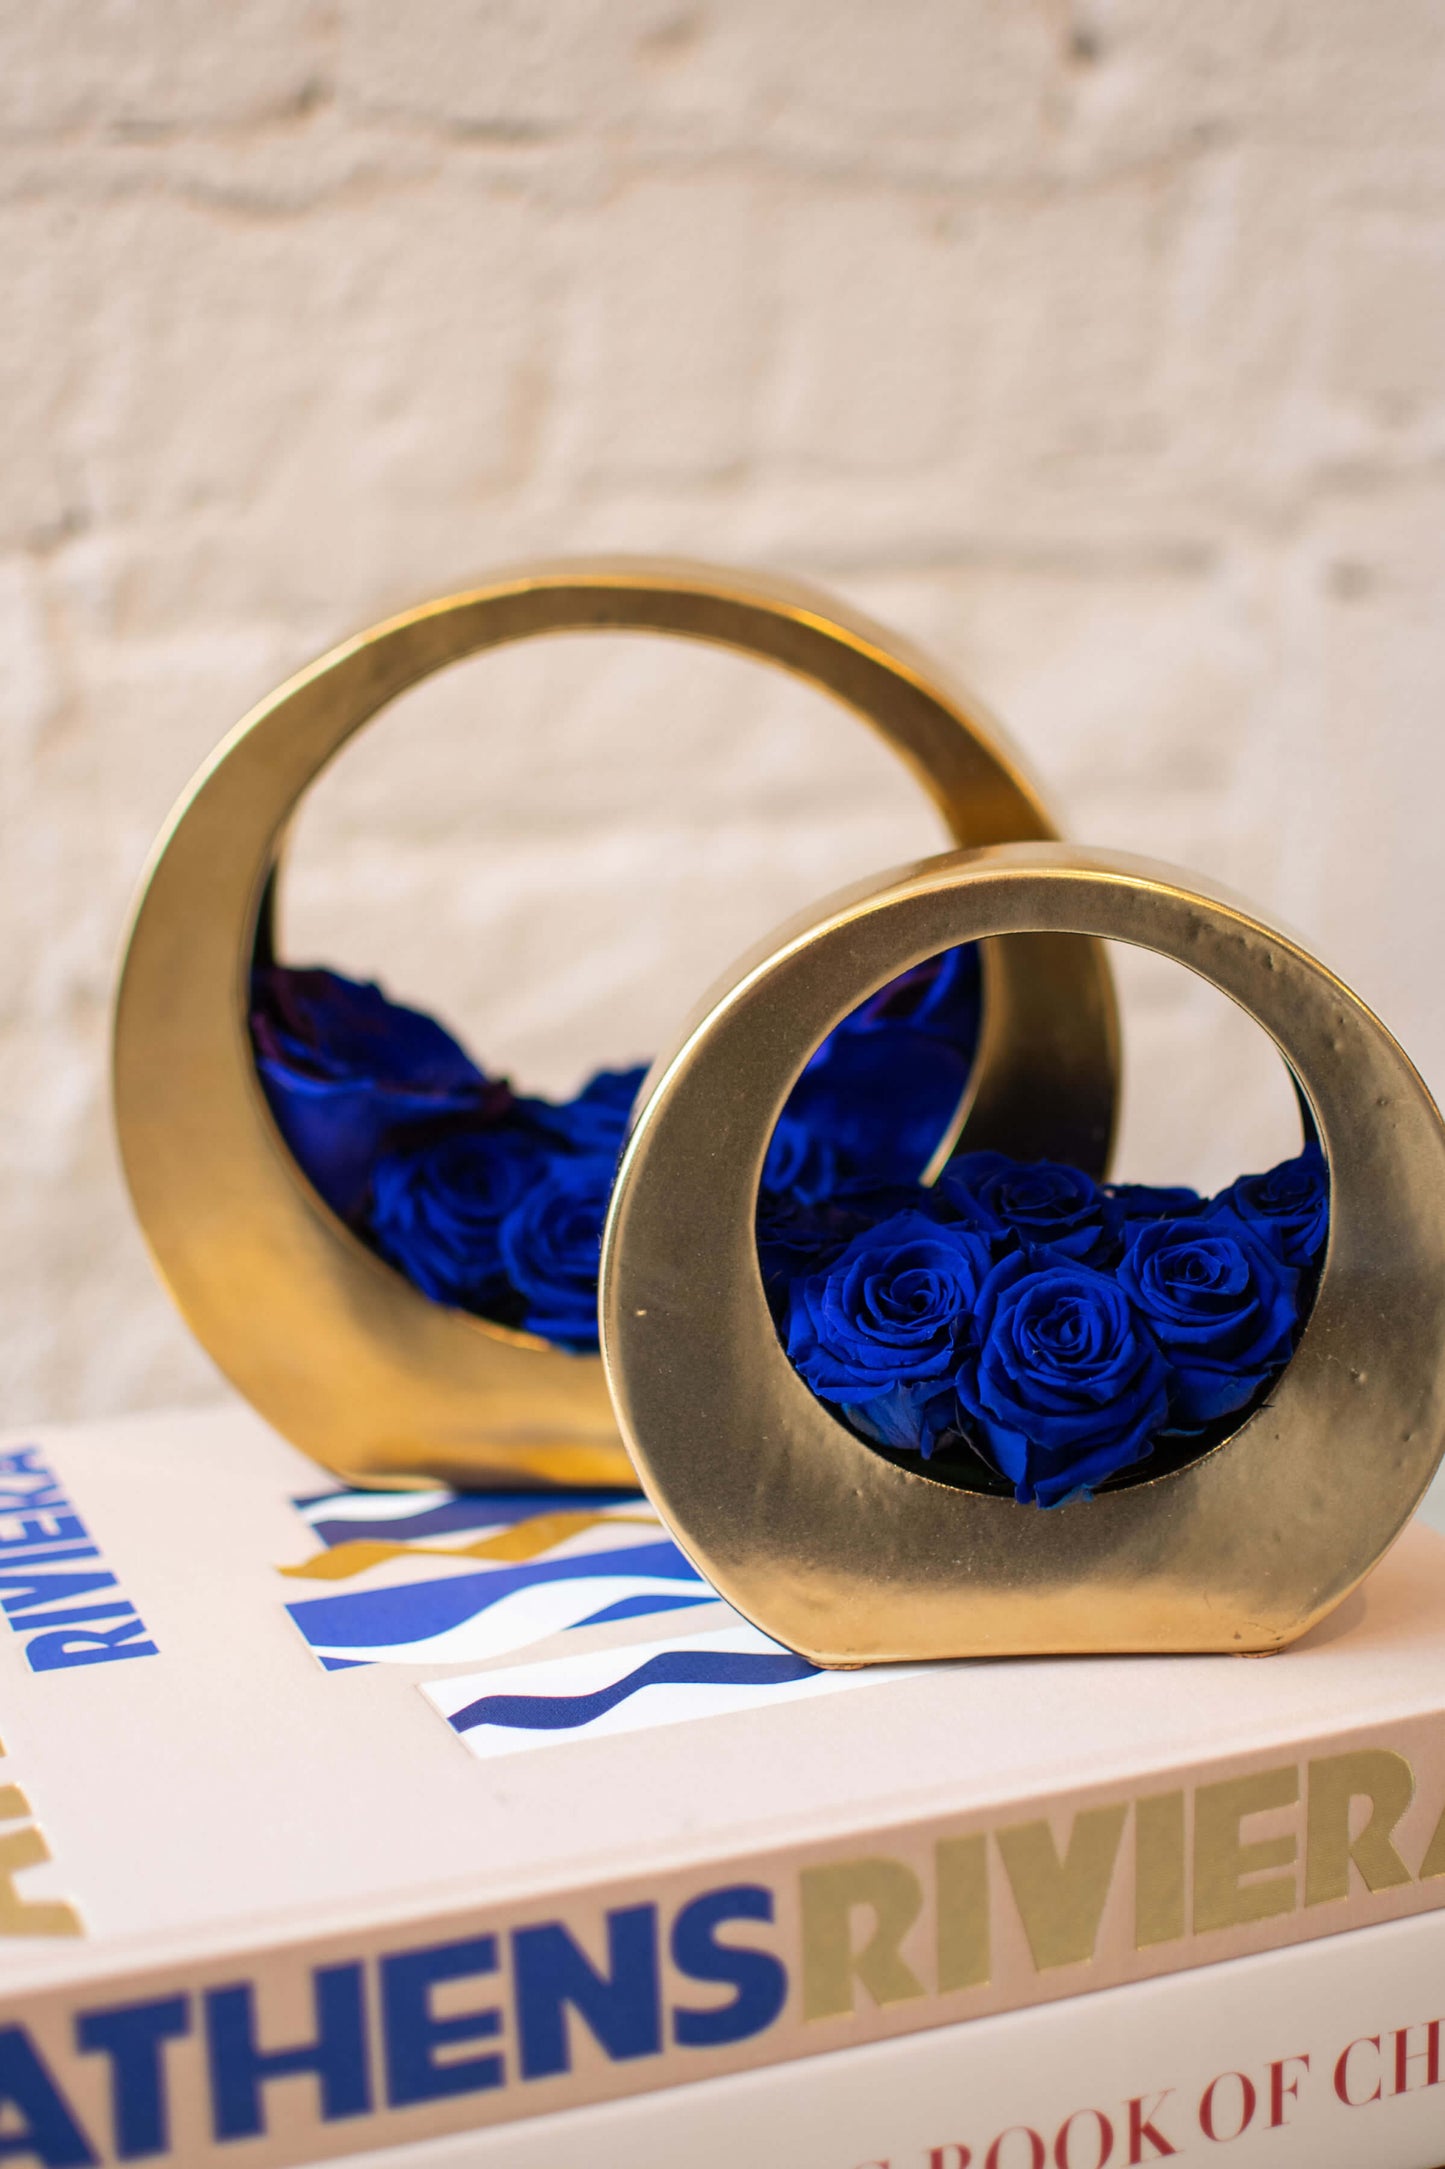 DOUBLE BLISS GOLDEN CIRCULAR VASES WITH PRESERVED ROSES